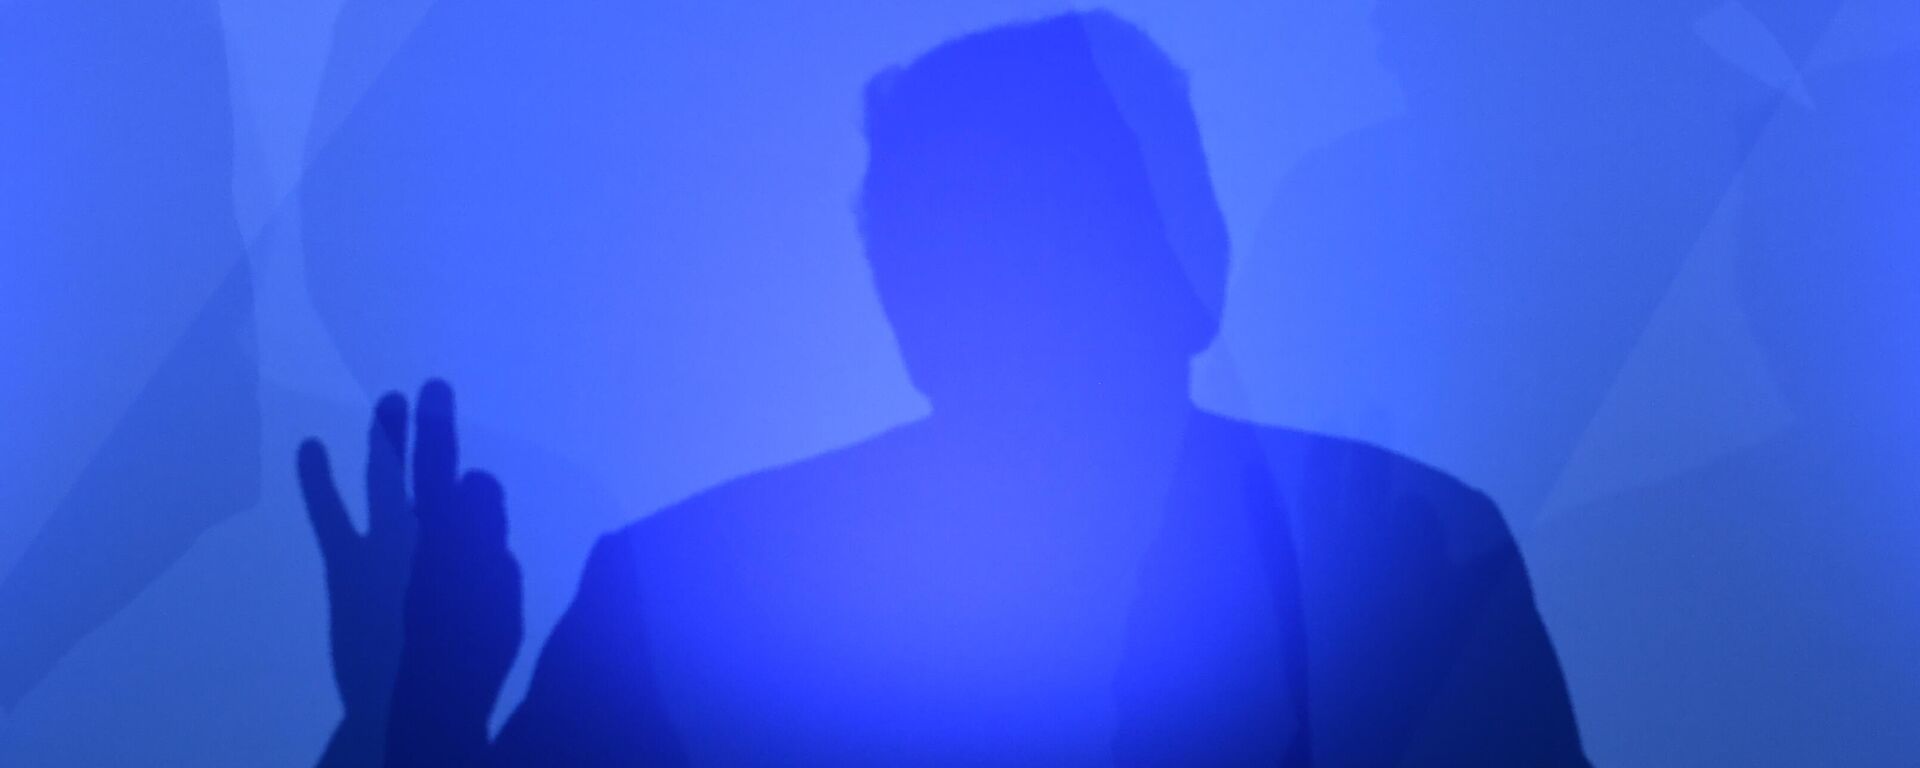 US President Donald Trump casts a shadow as he addresses a press conference on the second day of the North Atlantic Treaty Organization (NATO) summit in Brussels on July 12, 2018. - Sputnik International, 1920, 07.12.2023